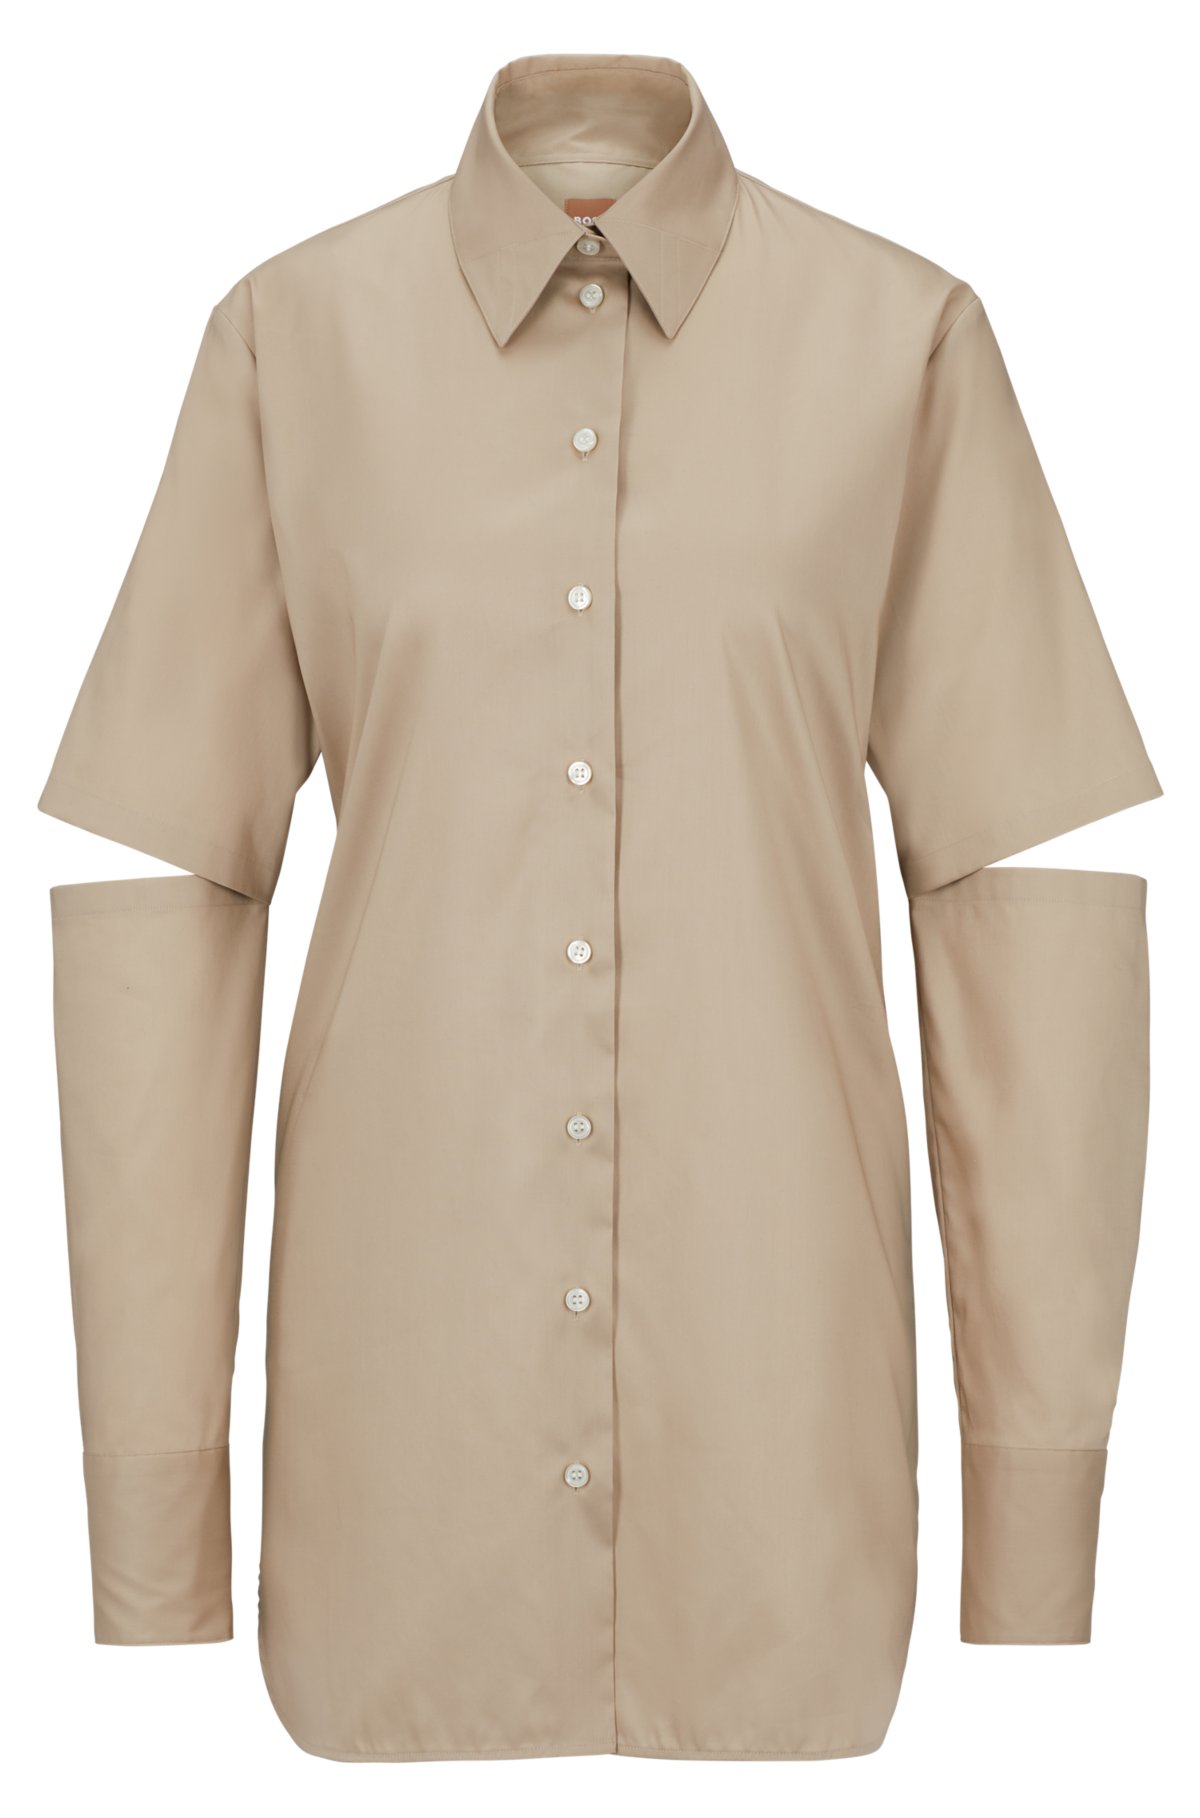 Relaxed Fit Shirts & Blouses